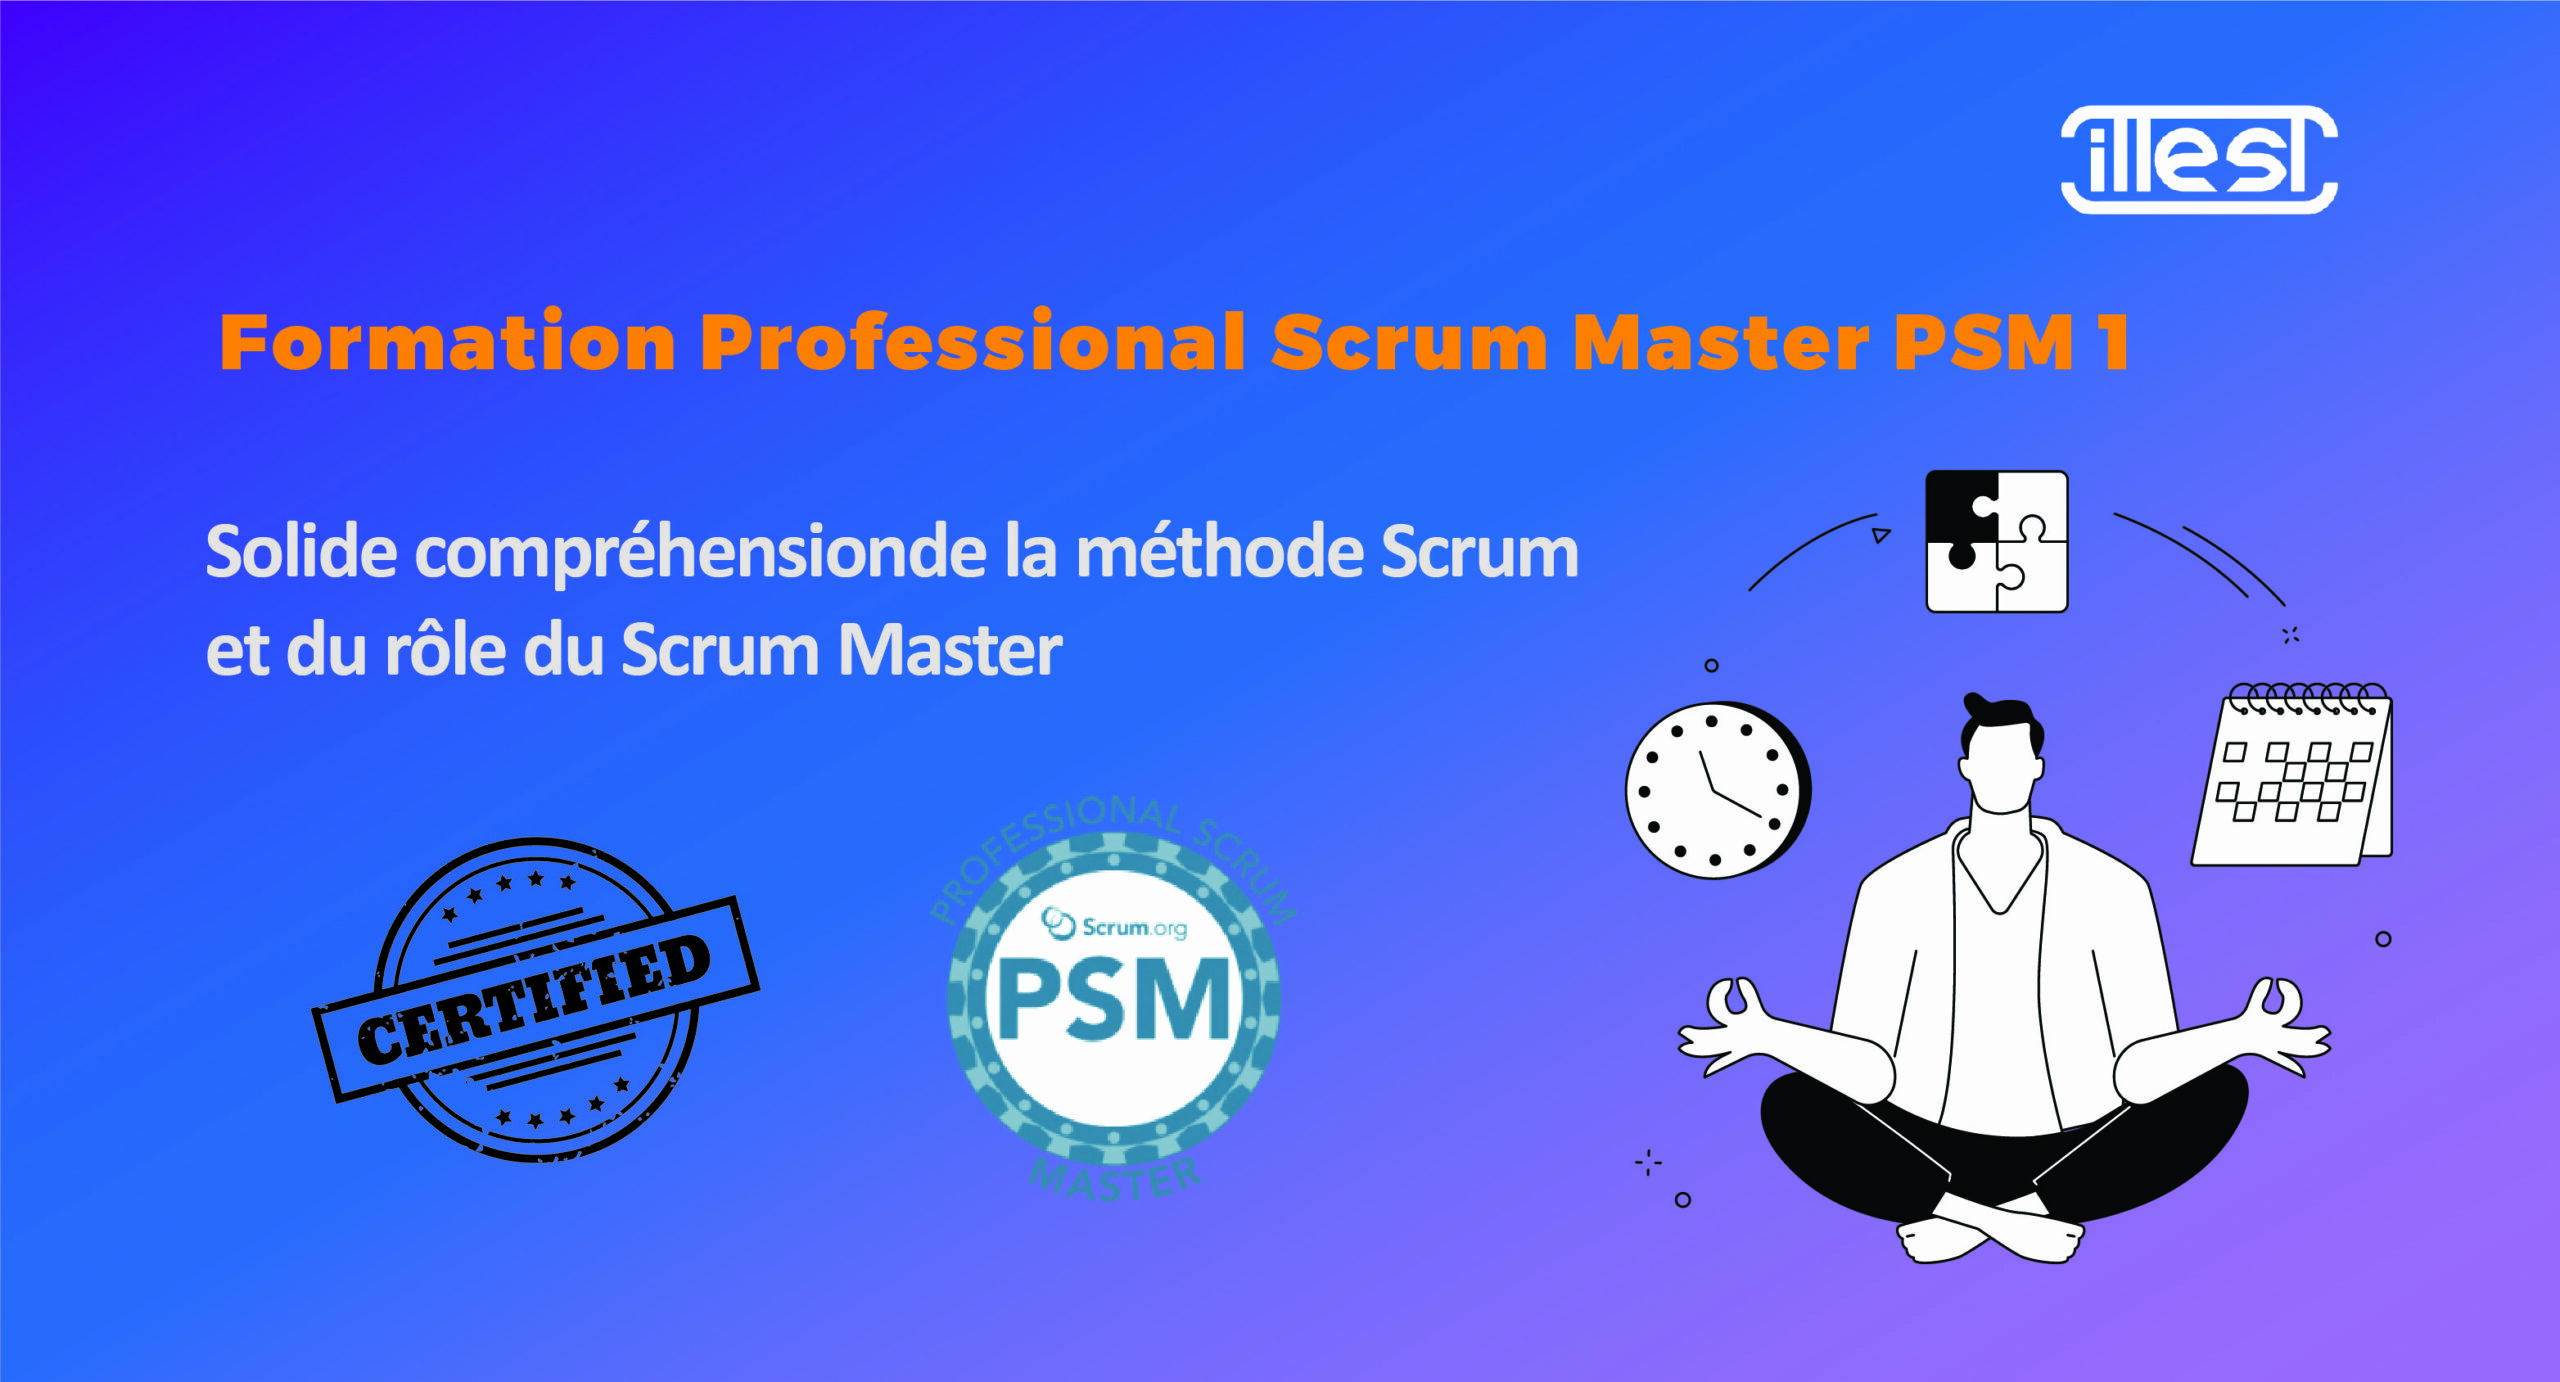 Formation Professional Scrum Master PSM 1